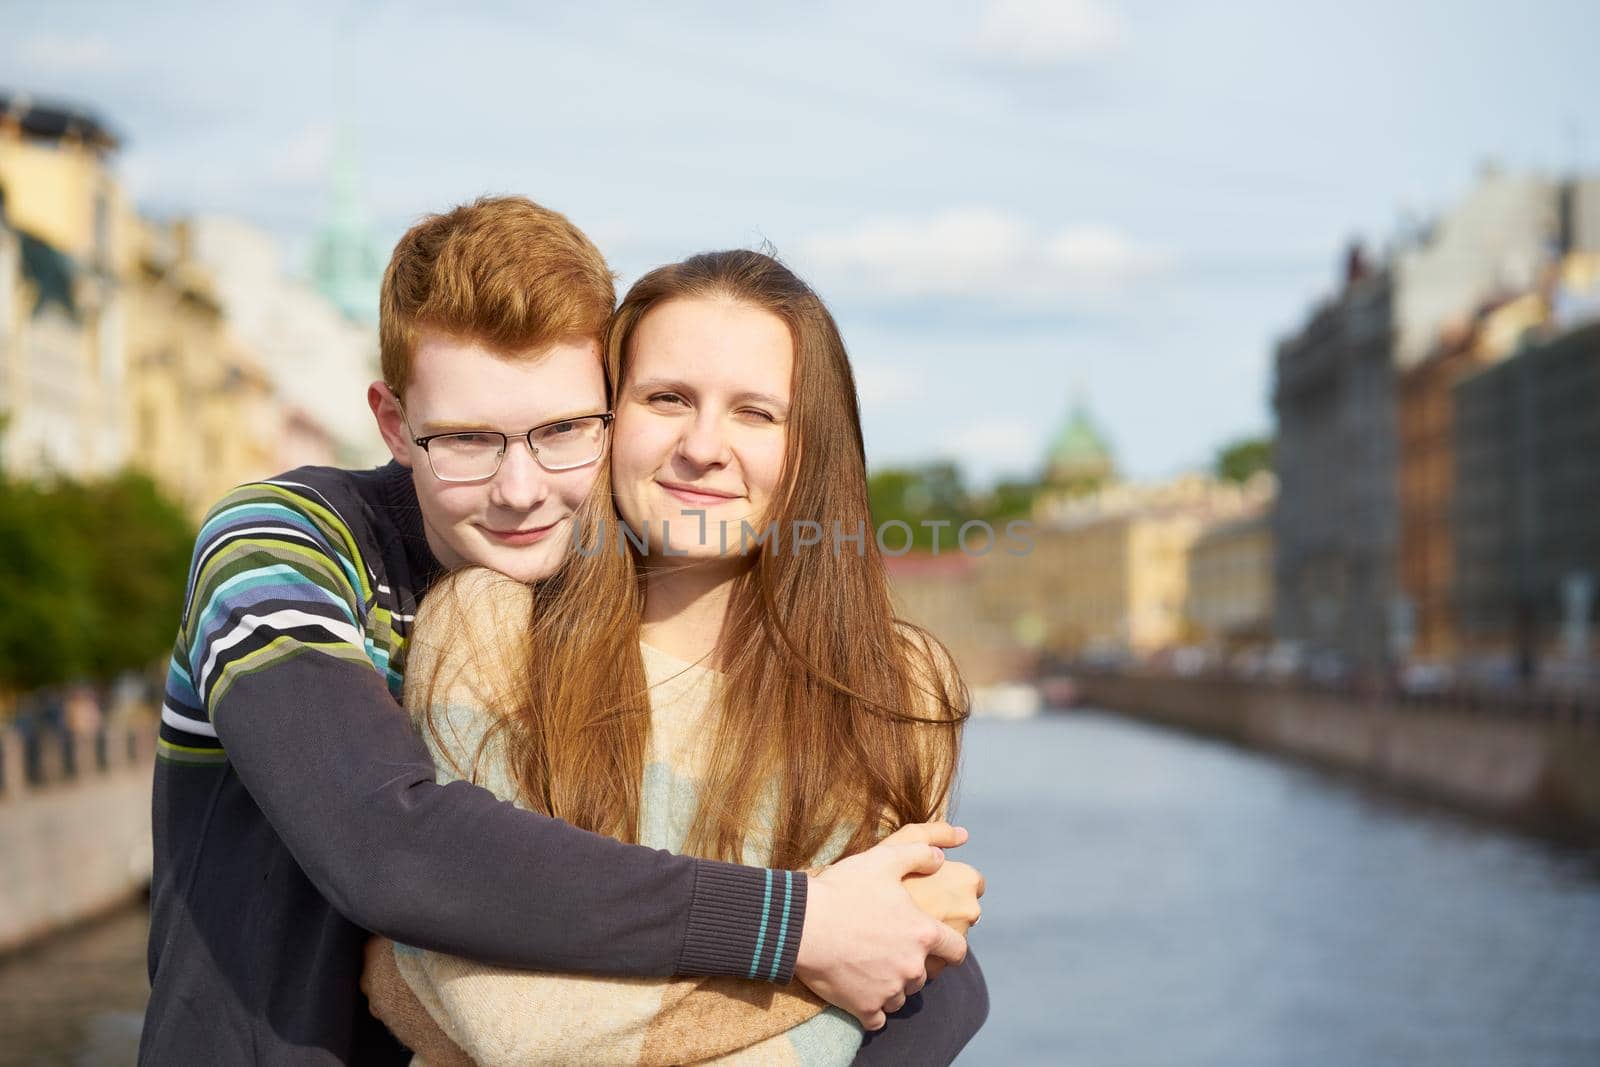 portrait of happy couple embracing in downtown, red-haired man with glasses, woman with long hair looking straight by NataBene